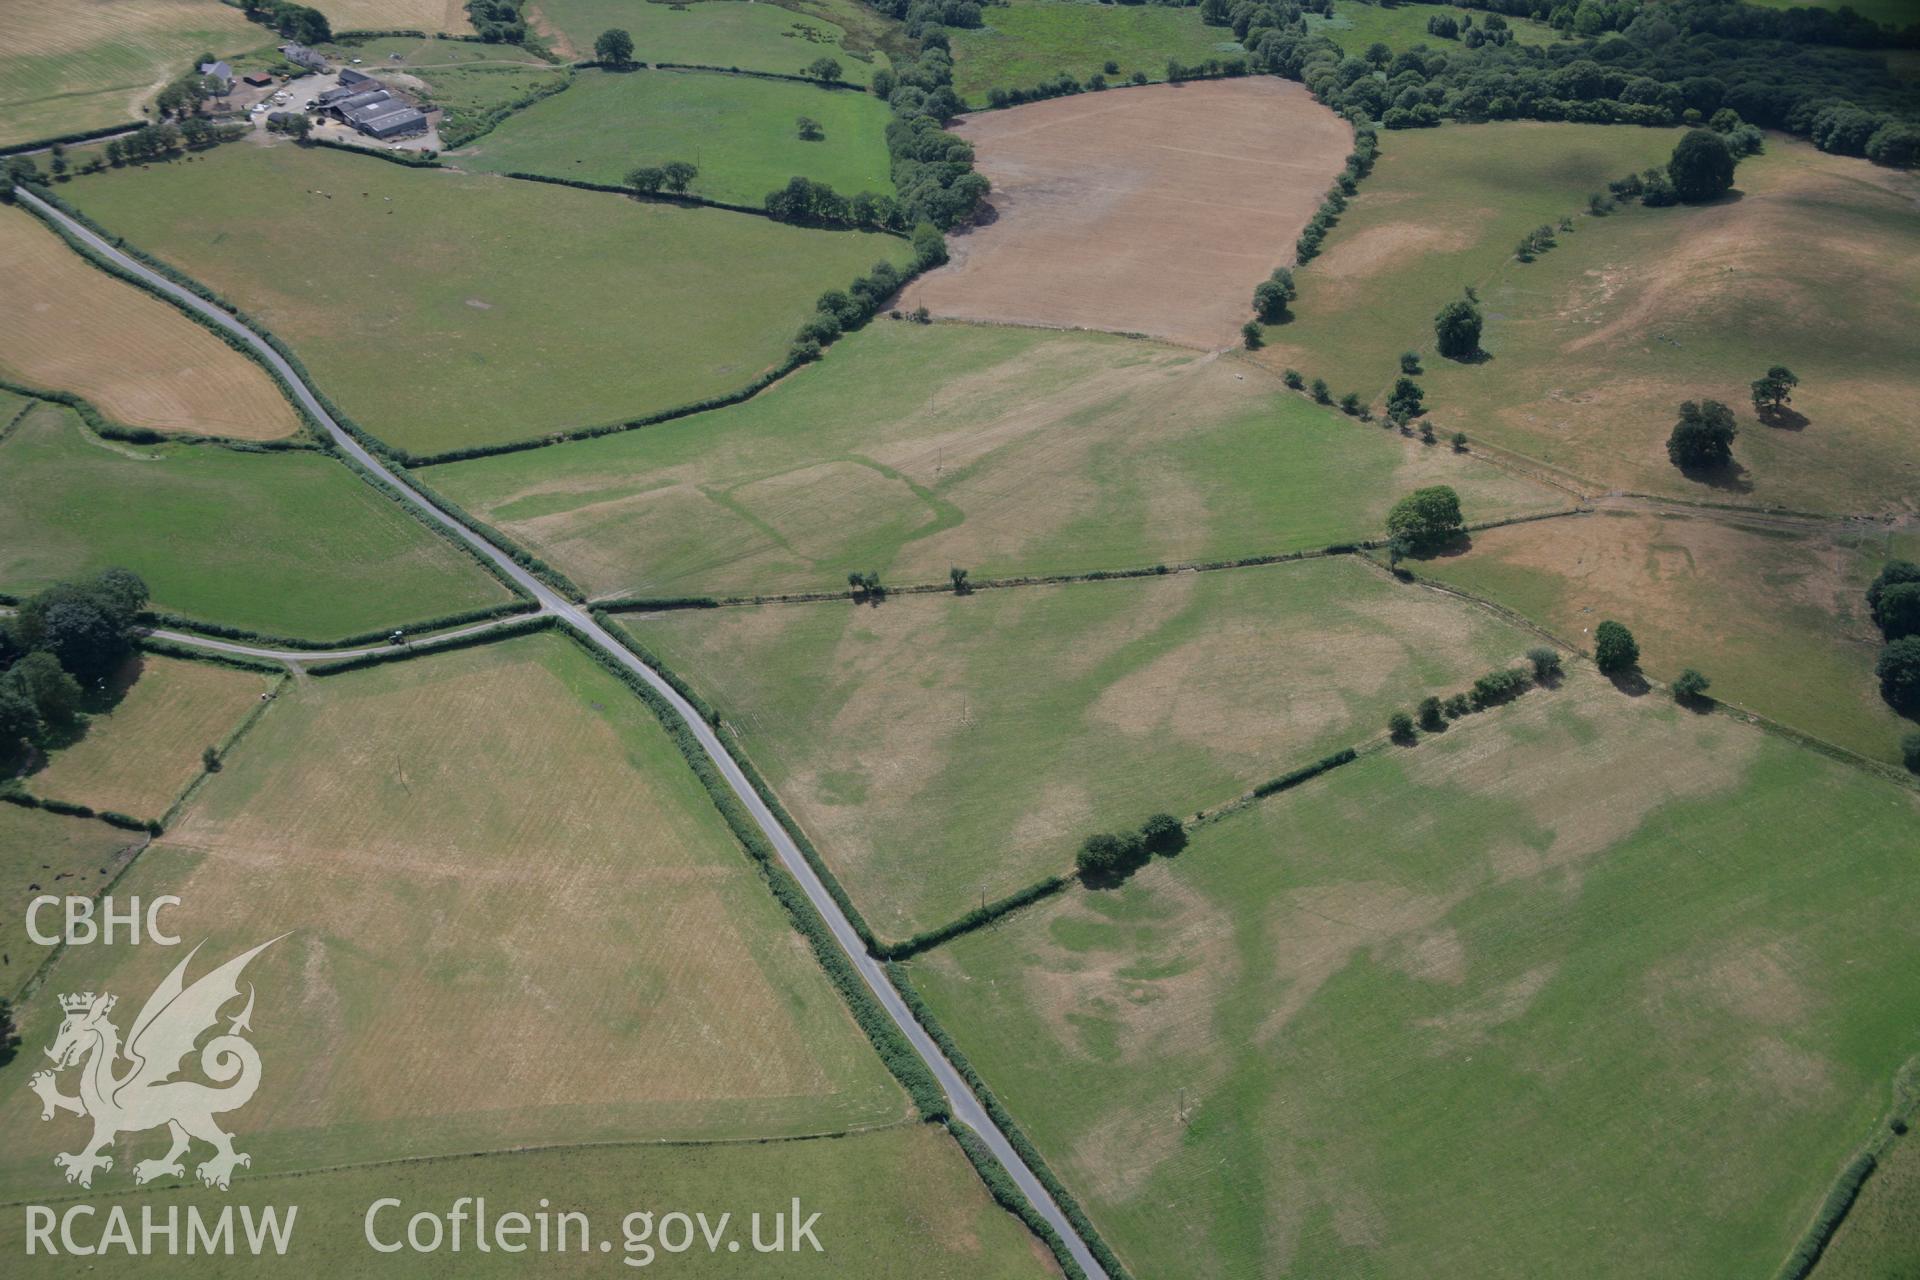 RCAHMW colour oblique aerial photograph of cropmark enclosures west of Caerau. Taken on 27 July 2006 by Toby Driver.